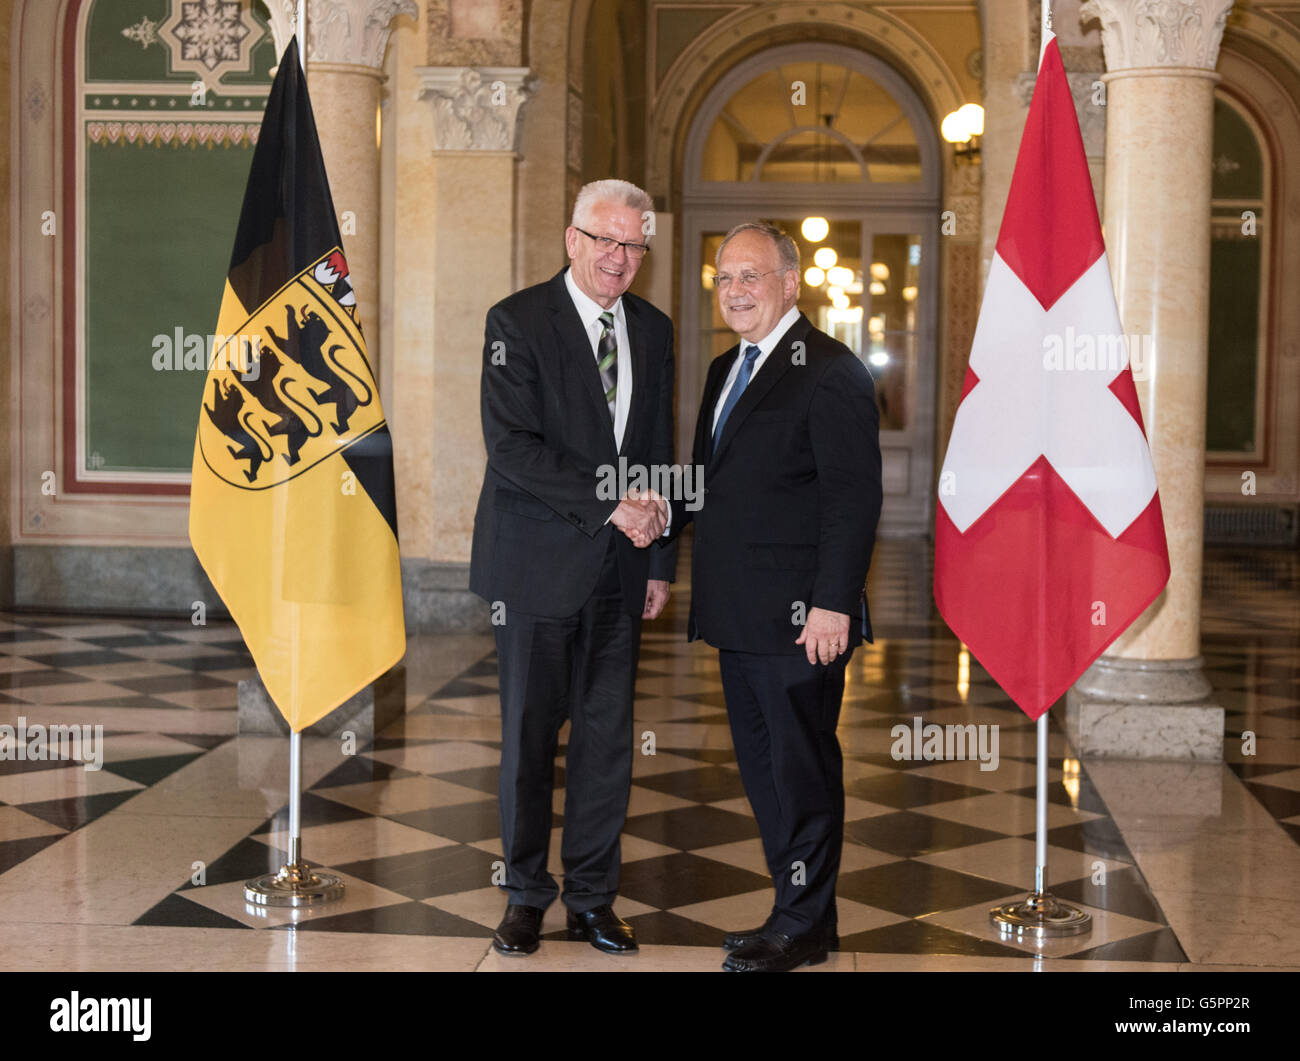 Bern, Switzerland. 23rd June, 2016. Premier of Baden-Württemberg Winfried Kretschmann (Buendnis 90/Die Gruenen, l) shaking hands with President of the Swiss Confederation and Economy Minister Johann Schneider-Ammann (r), in Bern, Switzerland, 23 June 2016. It is Kretschmann's first official visit since his re-election. PHOTO: PATRICK SEEGER/DPA/Alamy Live News Stock Photo